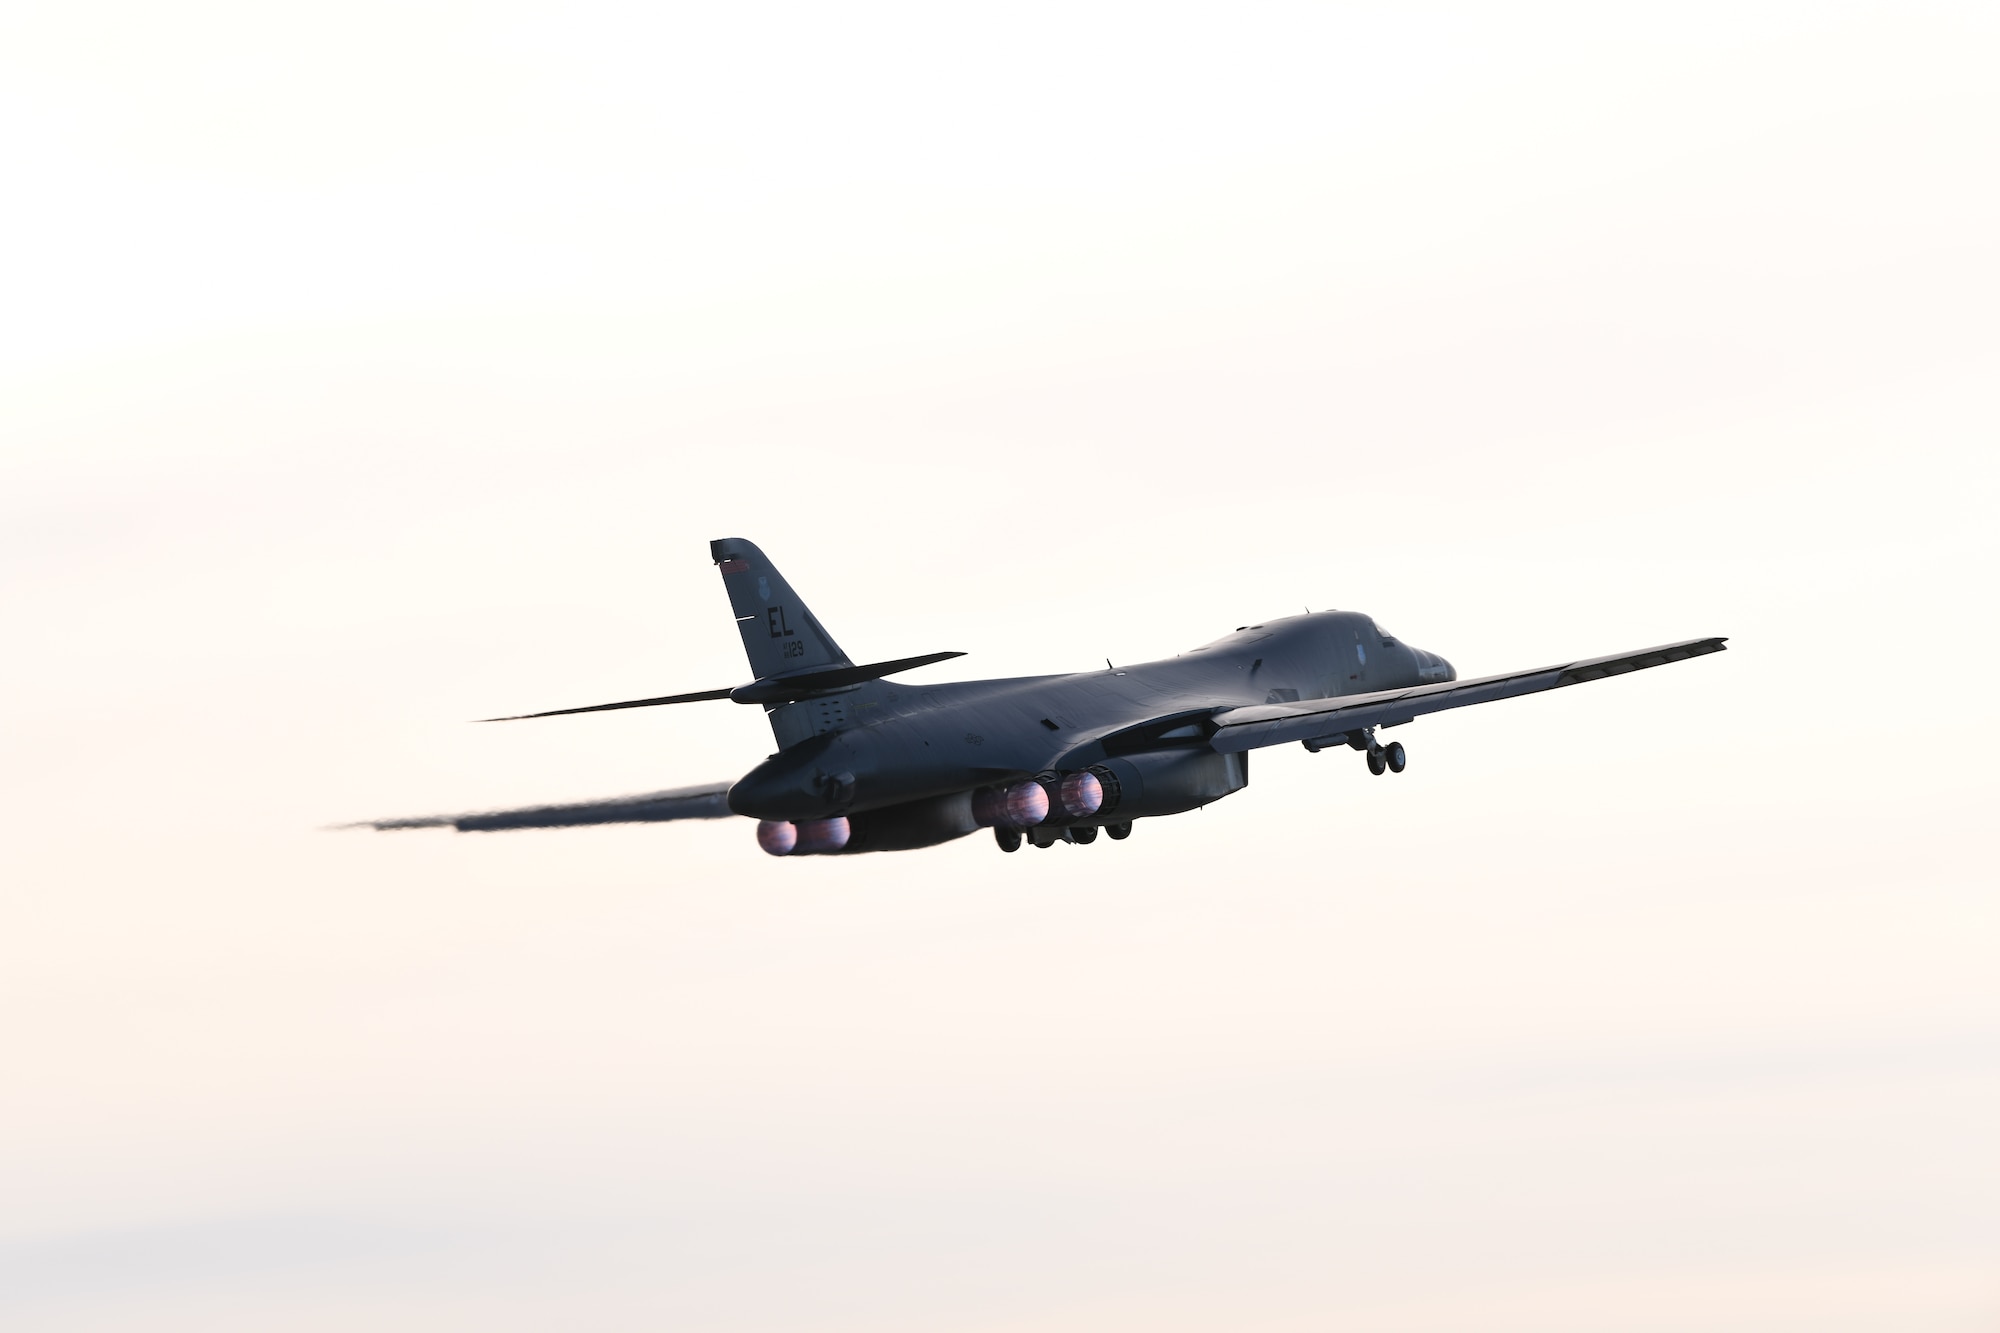 A B-1B Lancer launches for a non-stop deployment from Ellsworth Air Force Base, S.D., to the U.S. European Command area of responsibility May 4, 2020. U.S. Strategic Command first conducted these missions in 2014 as demonstrations of the United States’ commitment to collective security.  (U.S. Air Force photo by Senior Airman Nicolas Z. Erwin)